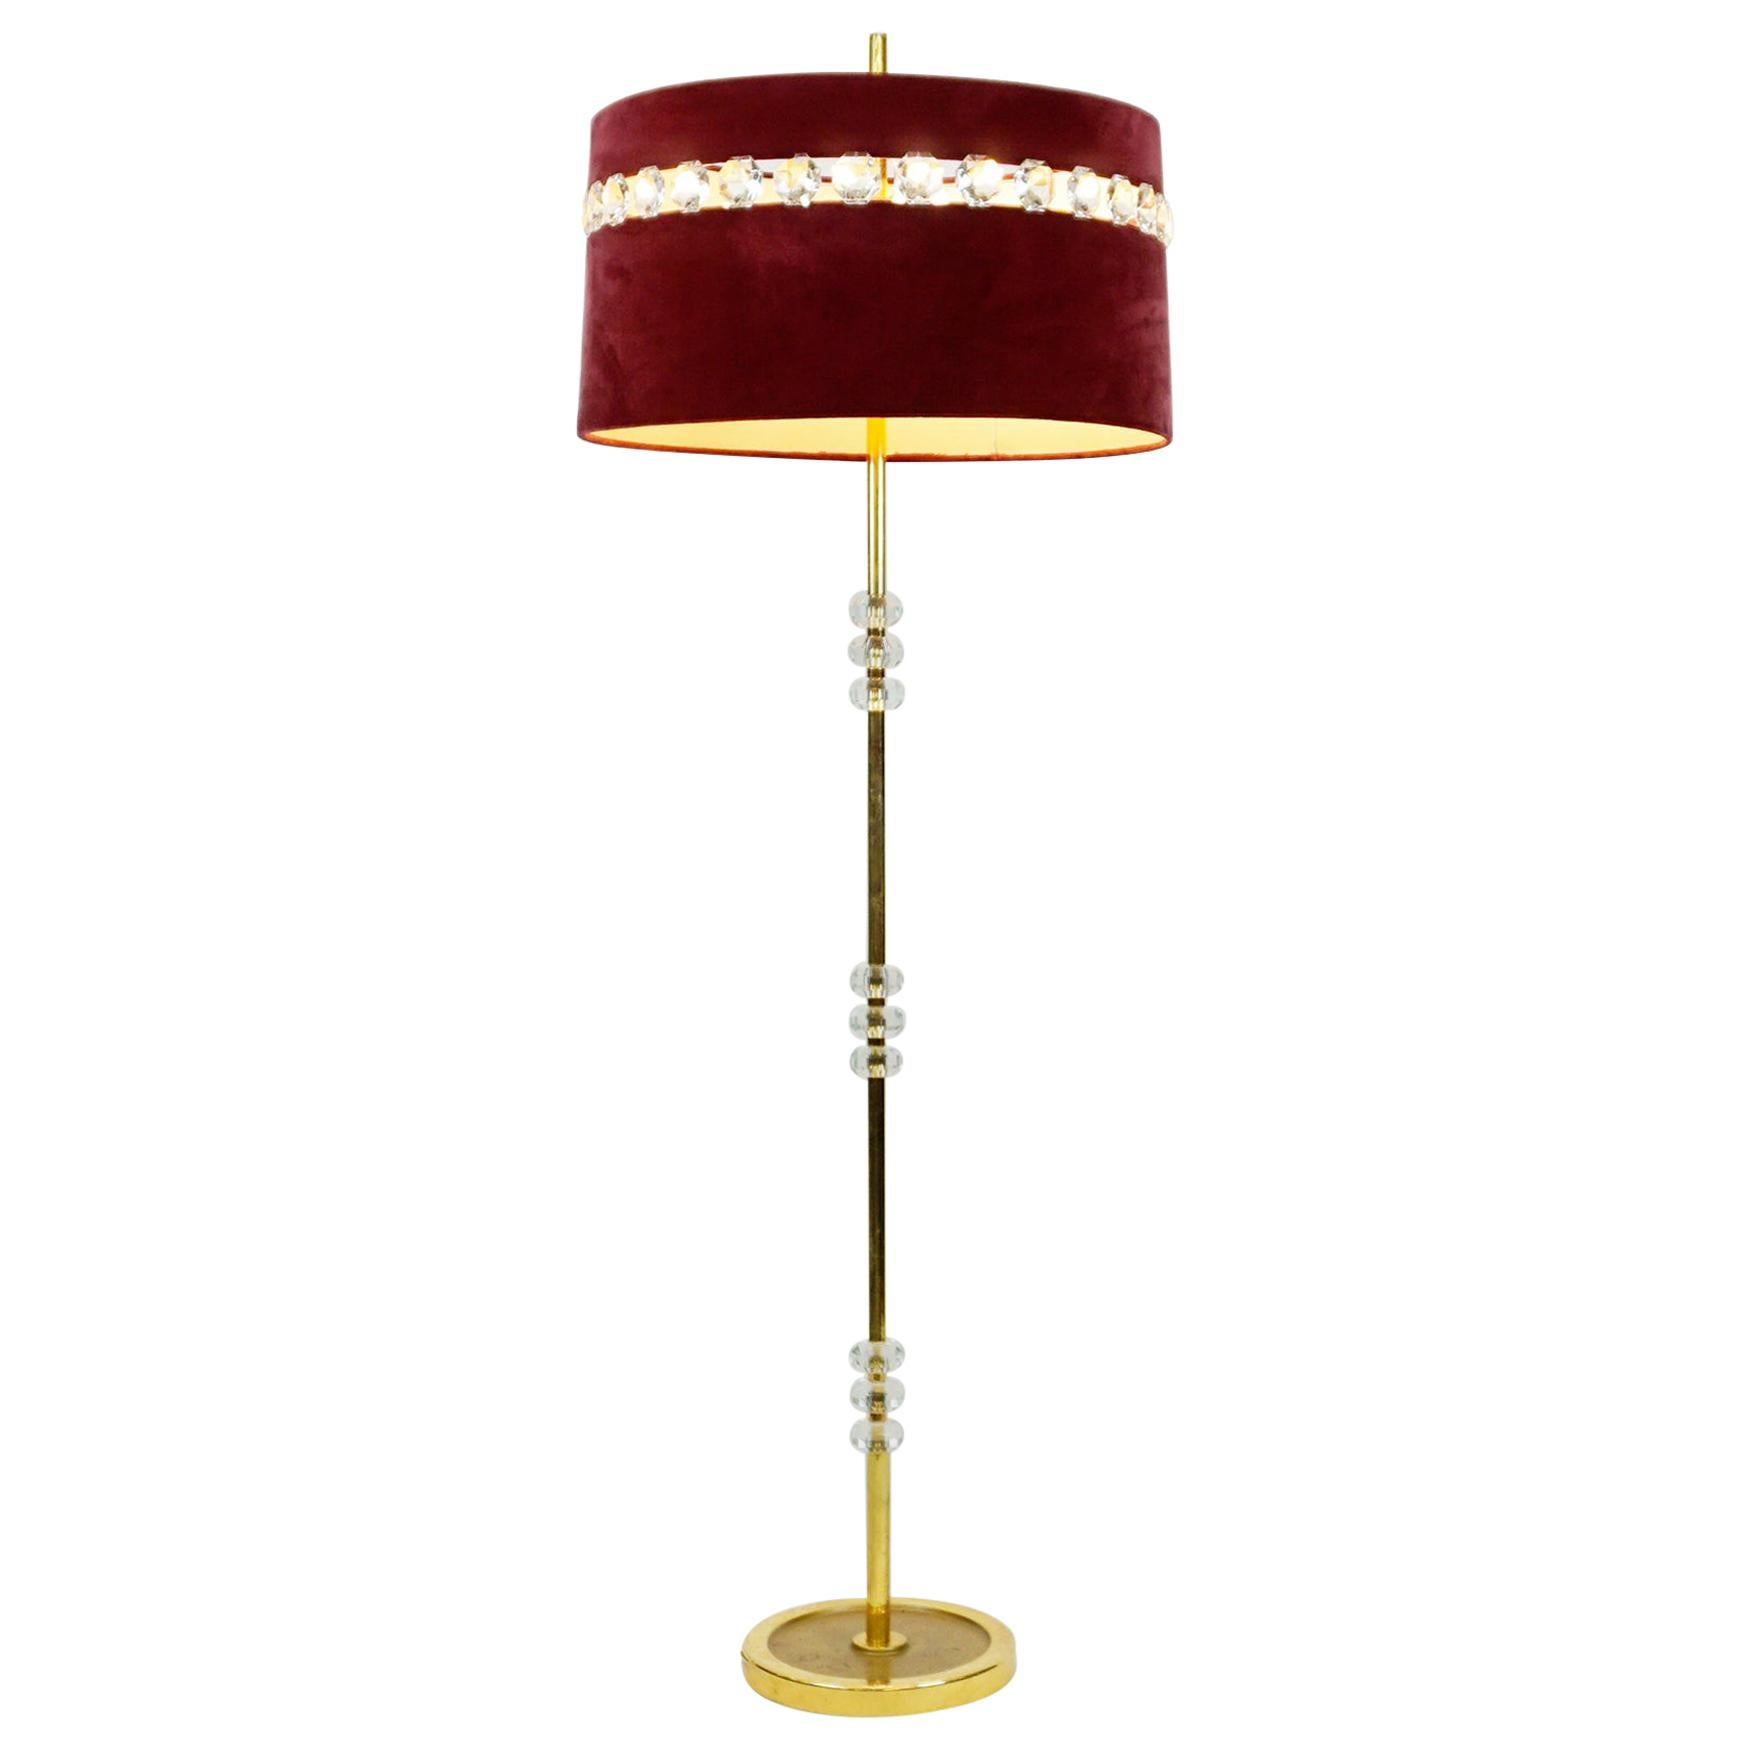 Austrian Midcentury Brass and Crystal Glass Floor Lamp with Red Velvet Shade For Sale